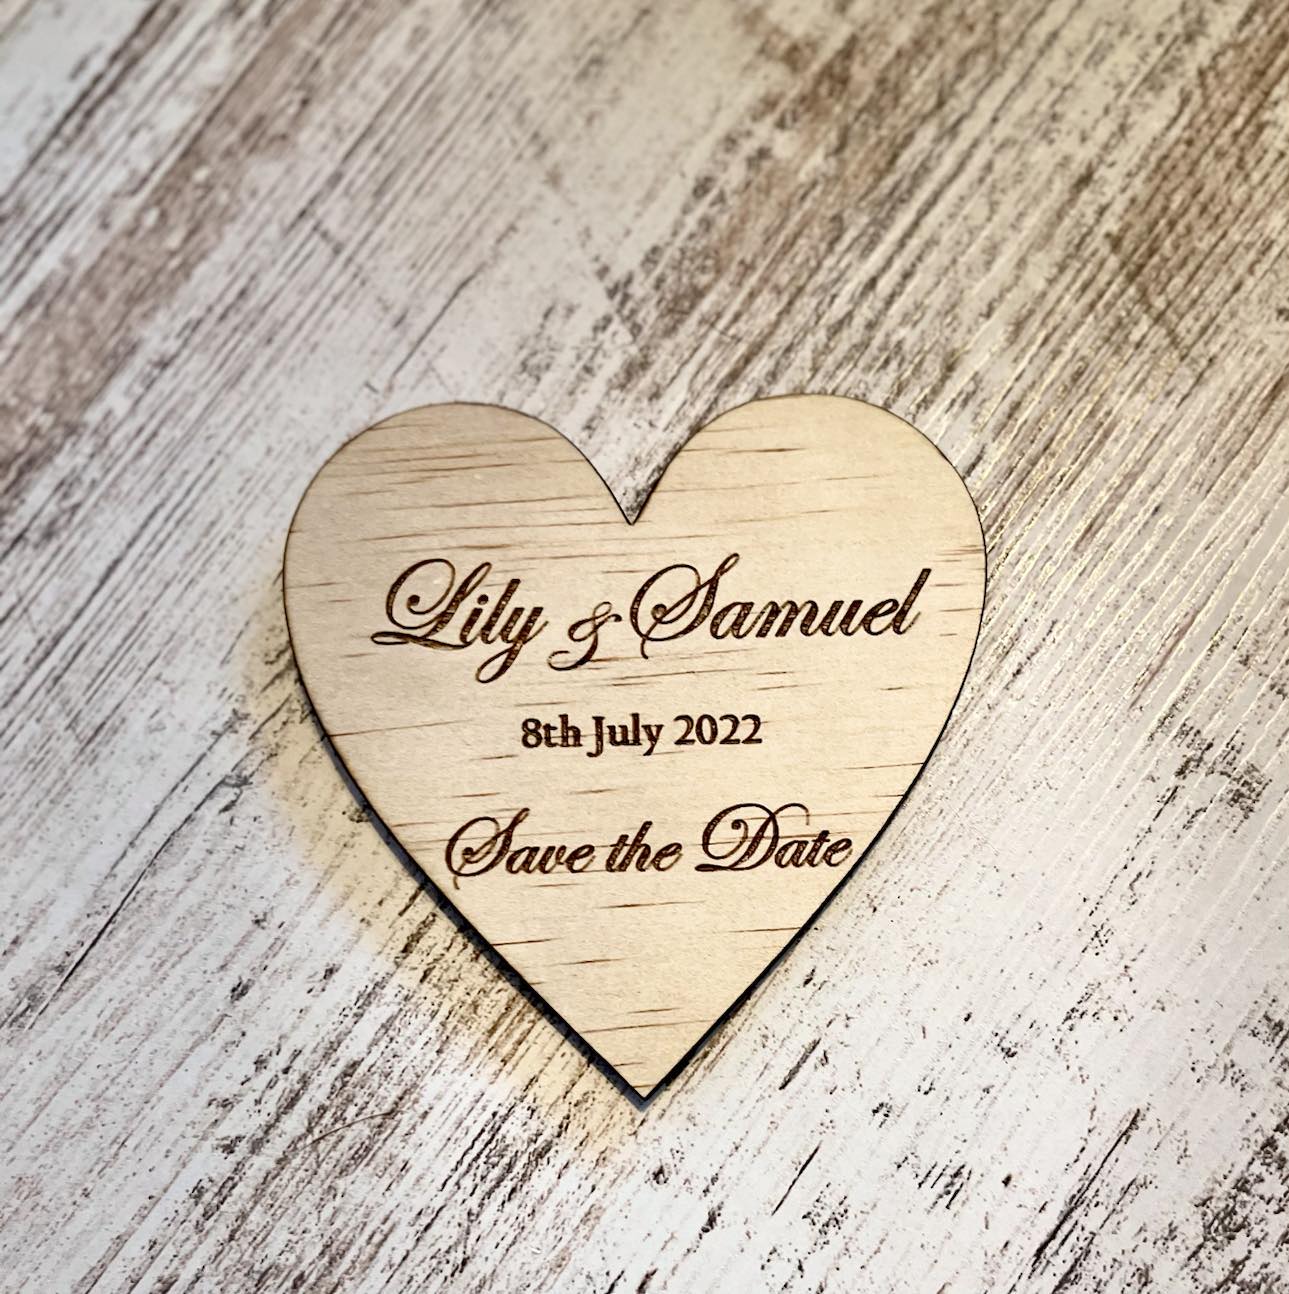 Engraved Wooden Heart "Save the Date" | Design Hut